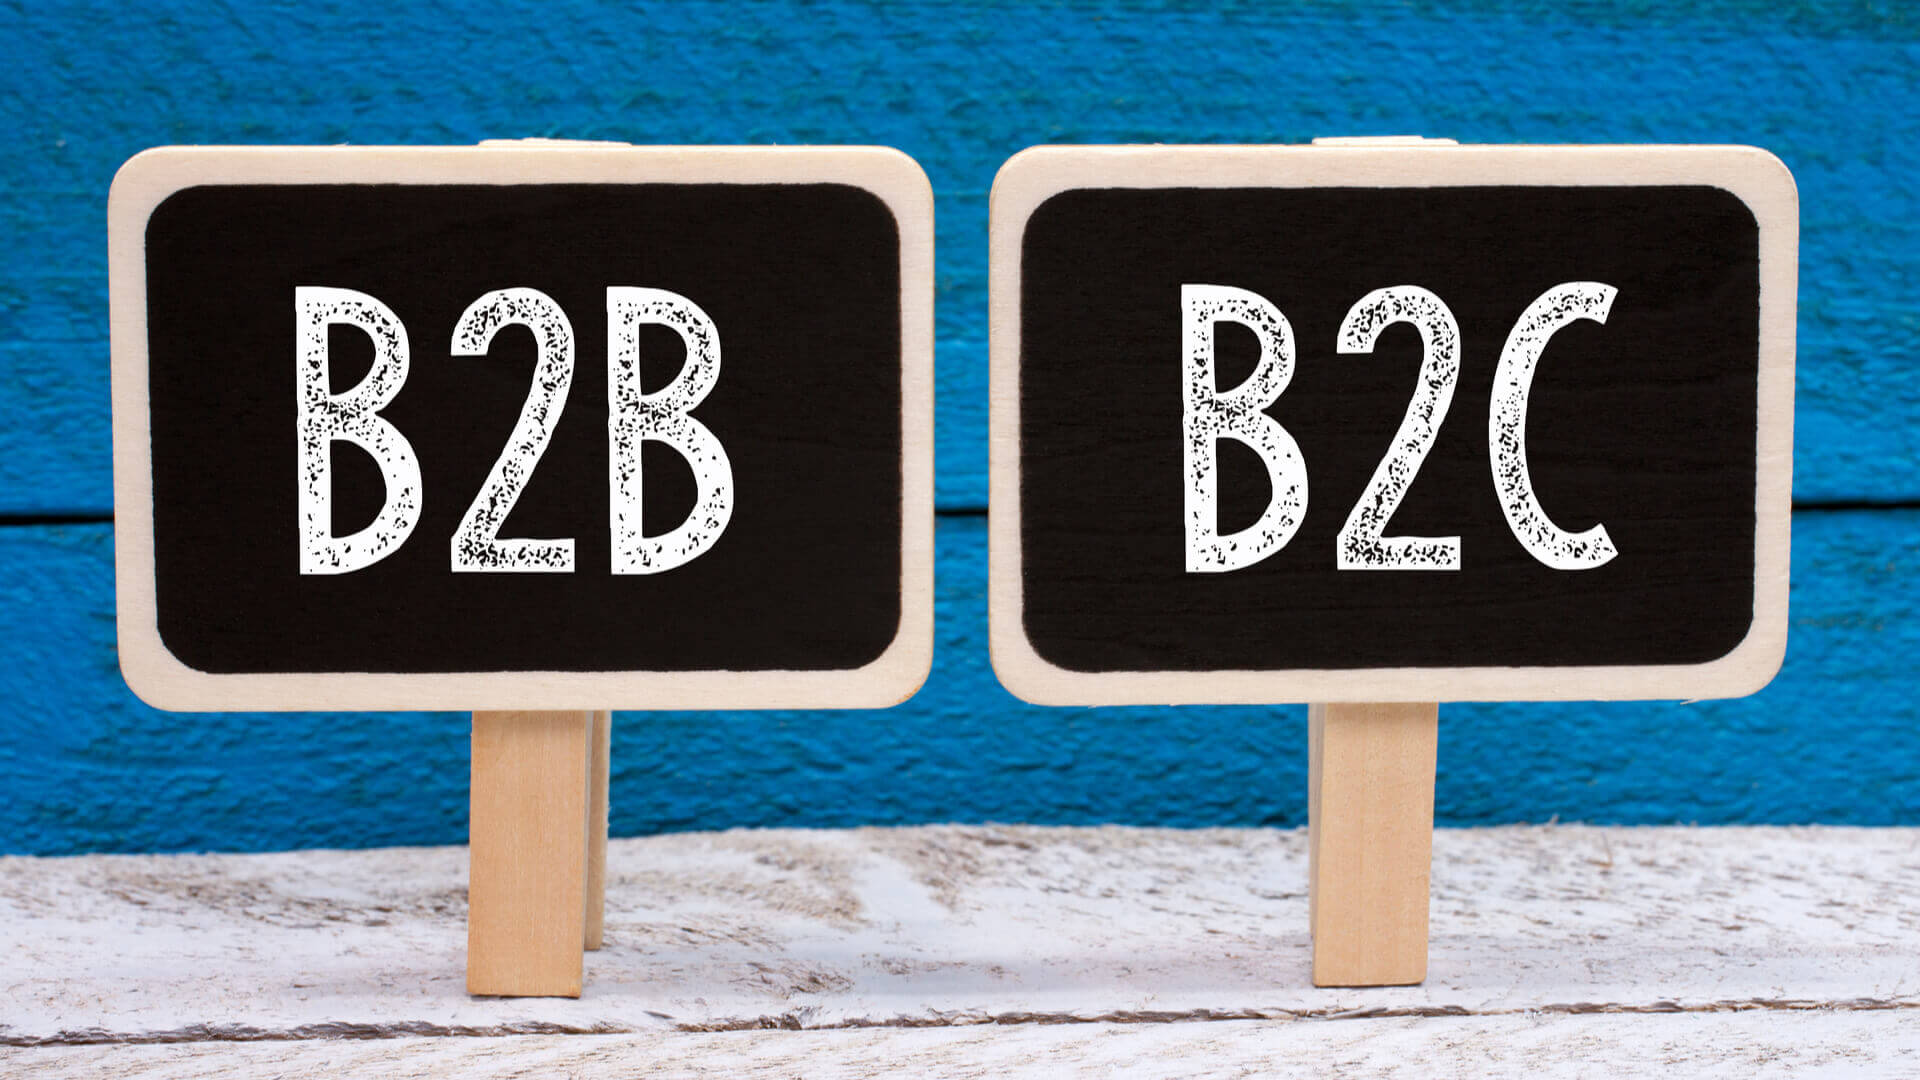 Not all B2B and B2C categorizations are alike